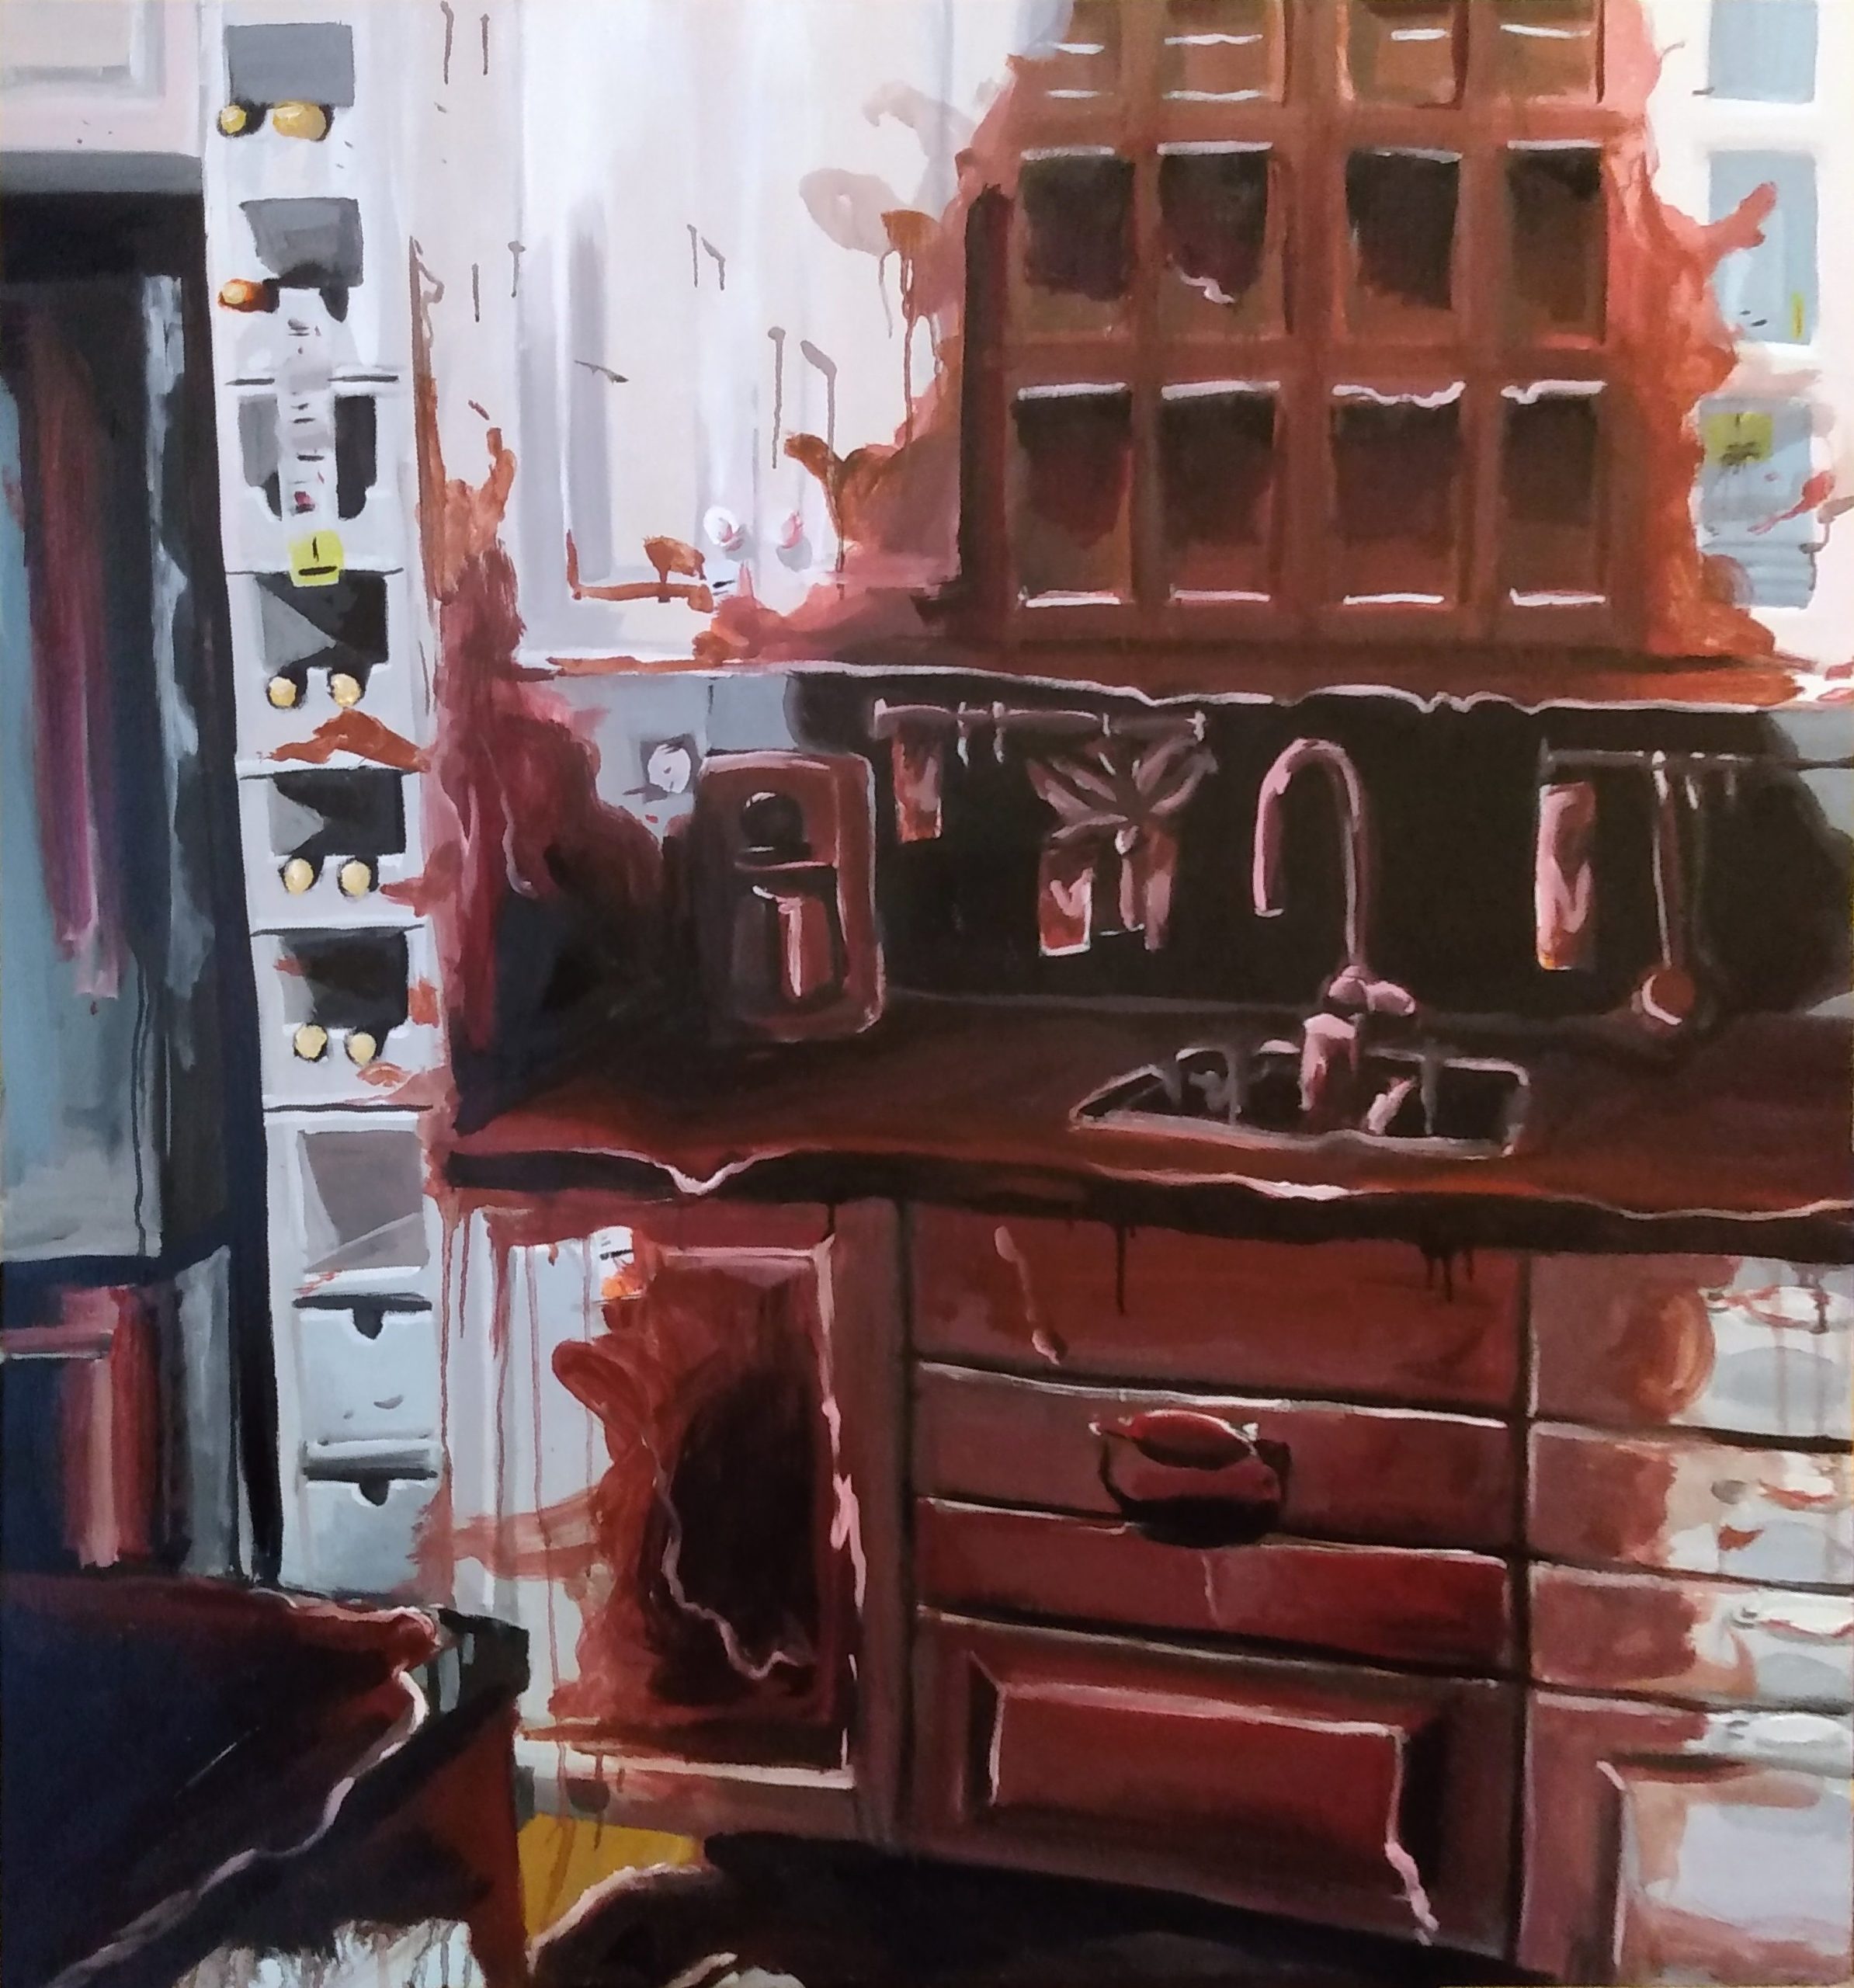 An oil painting of an IKEA kitchen set covered in blood. The wine rack and island are stained in blood and something bloody is also reflected in the stainless steel fridge. blood pools on the floor in front of the sink.